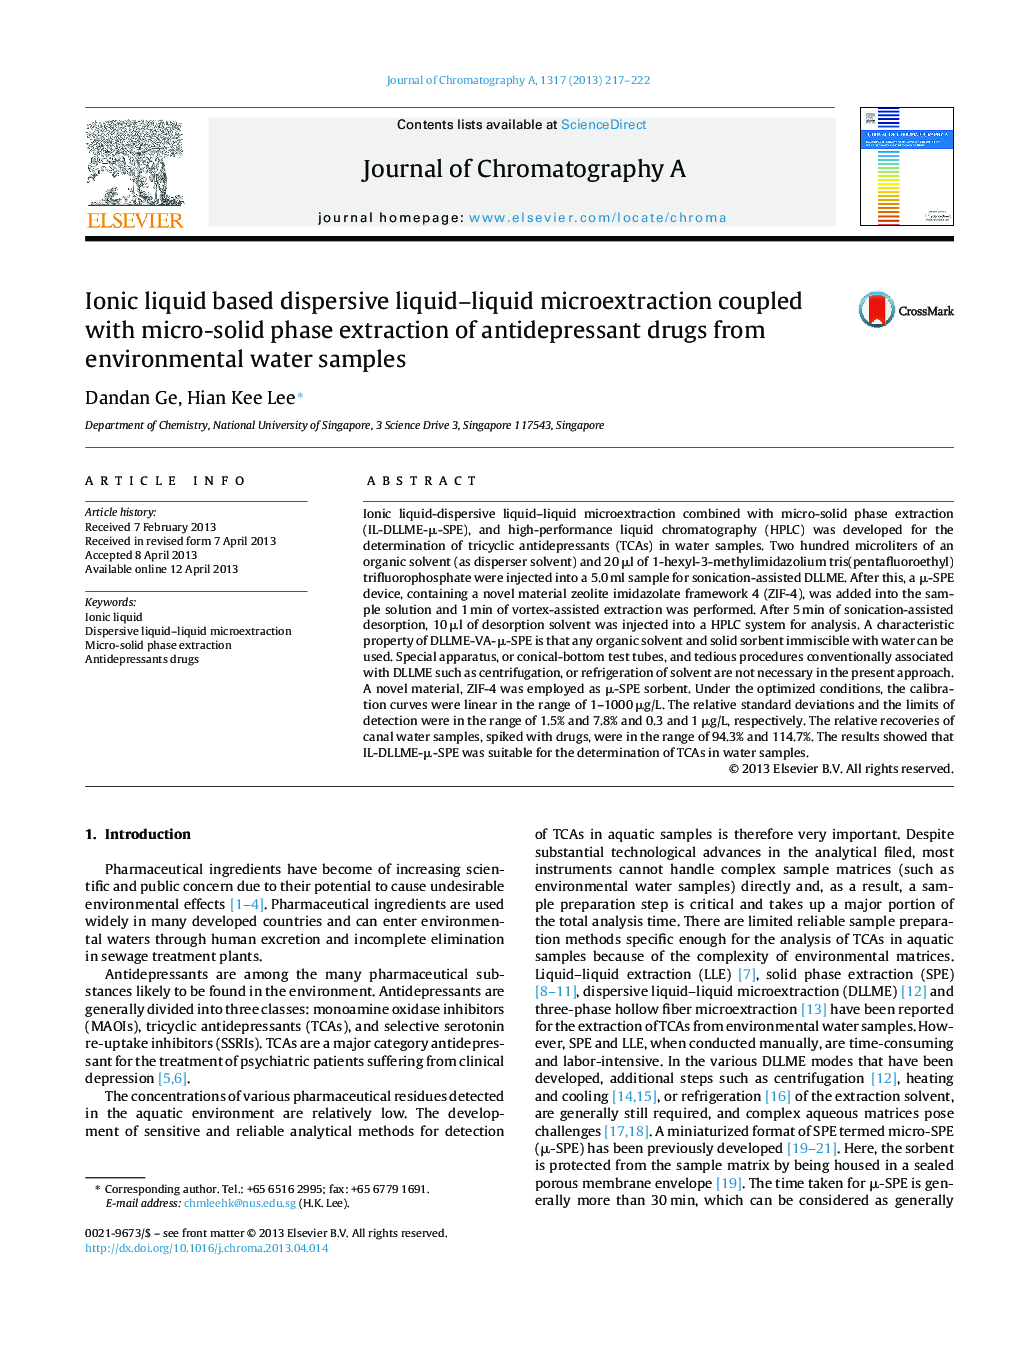 Ionic liquid based dispersive liquid–liquid microextraction coupled with micro-solid phase extraction of antidepressant drugs from environmental water samples